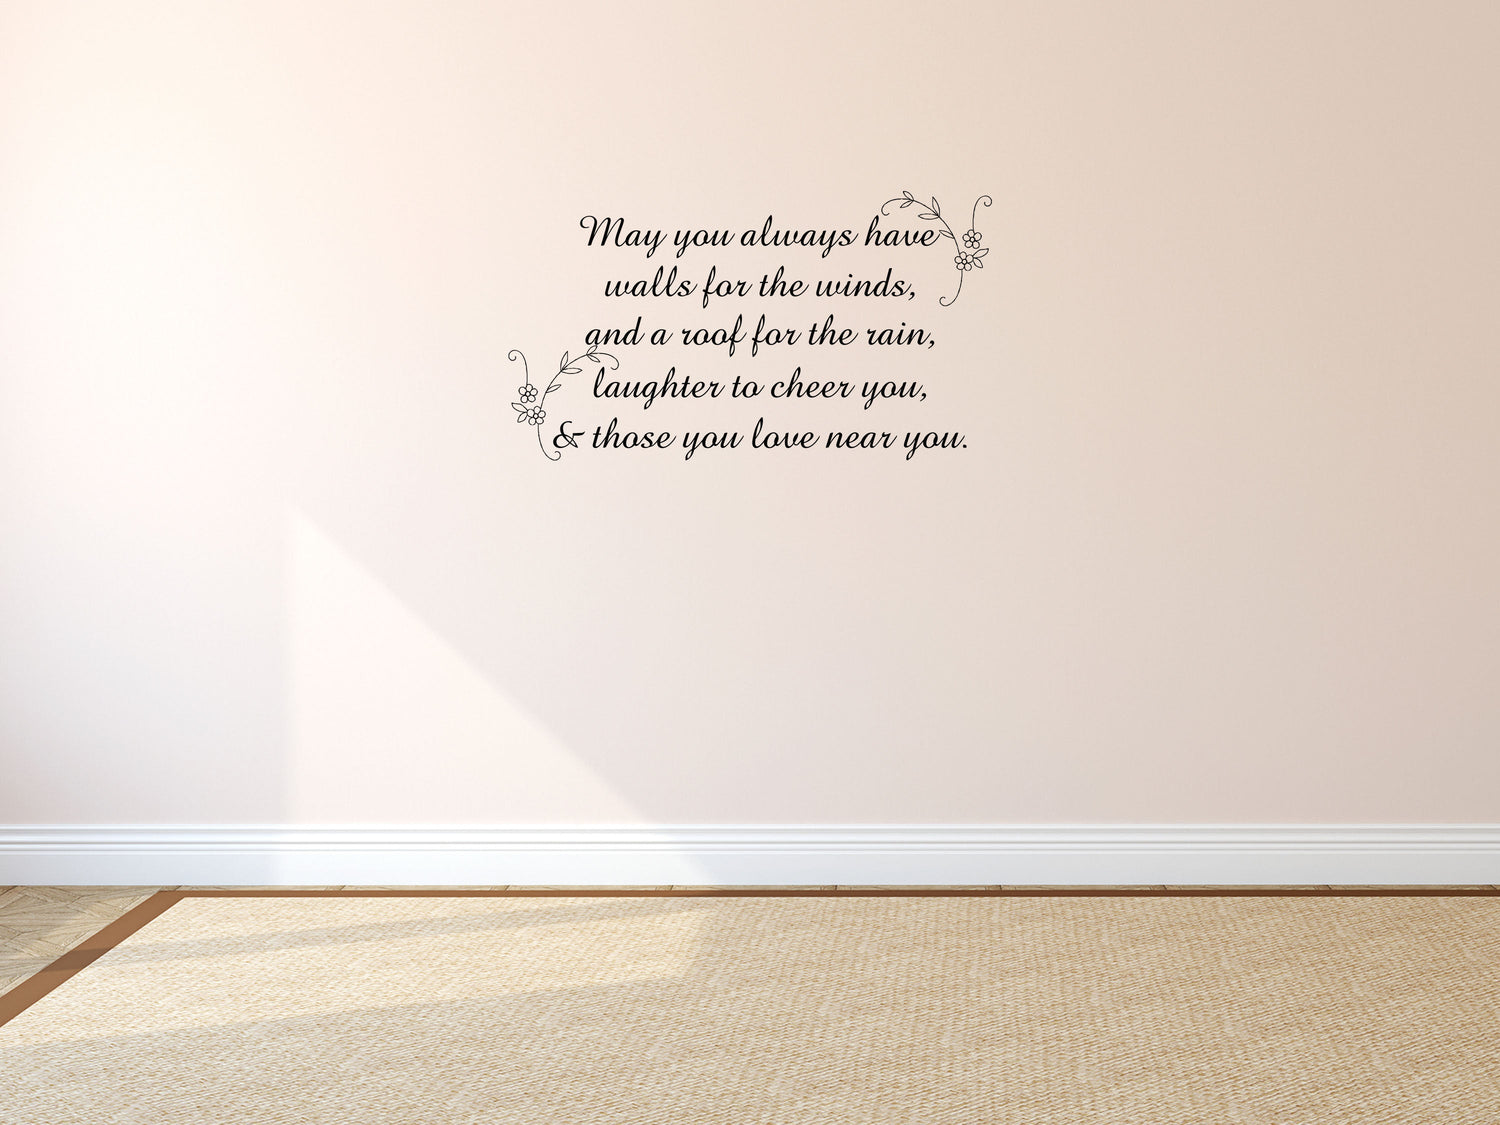 Irish Blessing Wall Word Inspirational Wall Decals Vinyl Wall Decal Done 